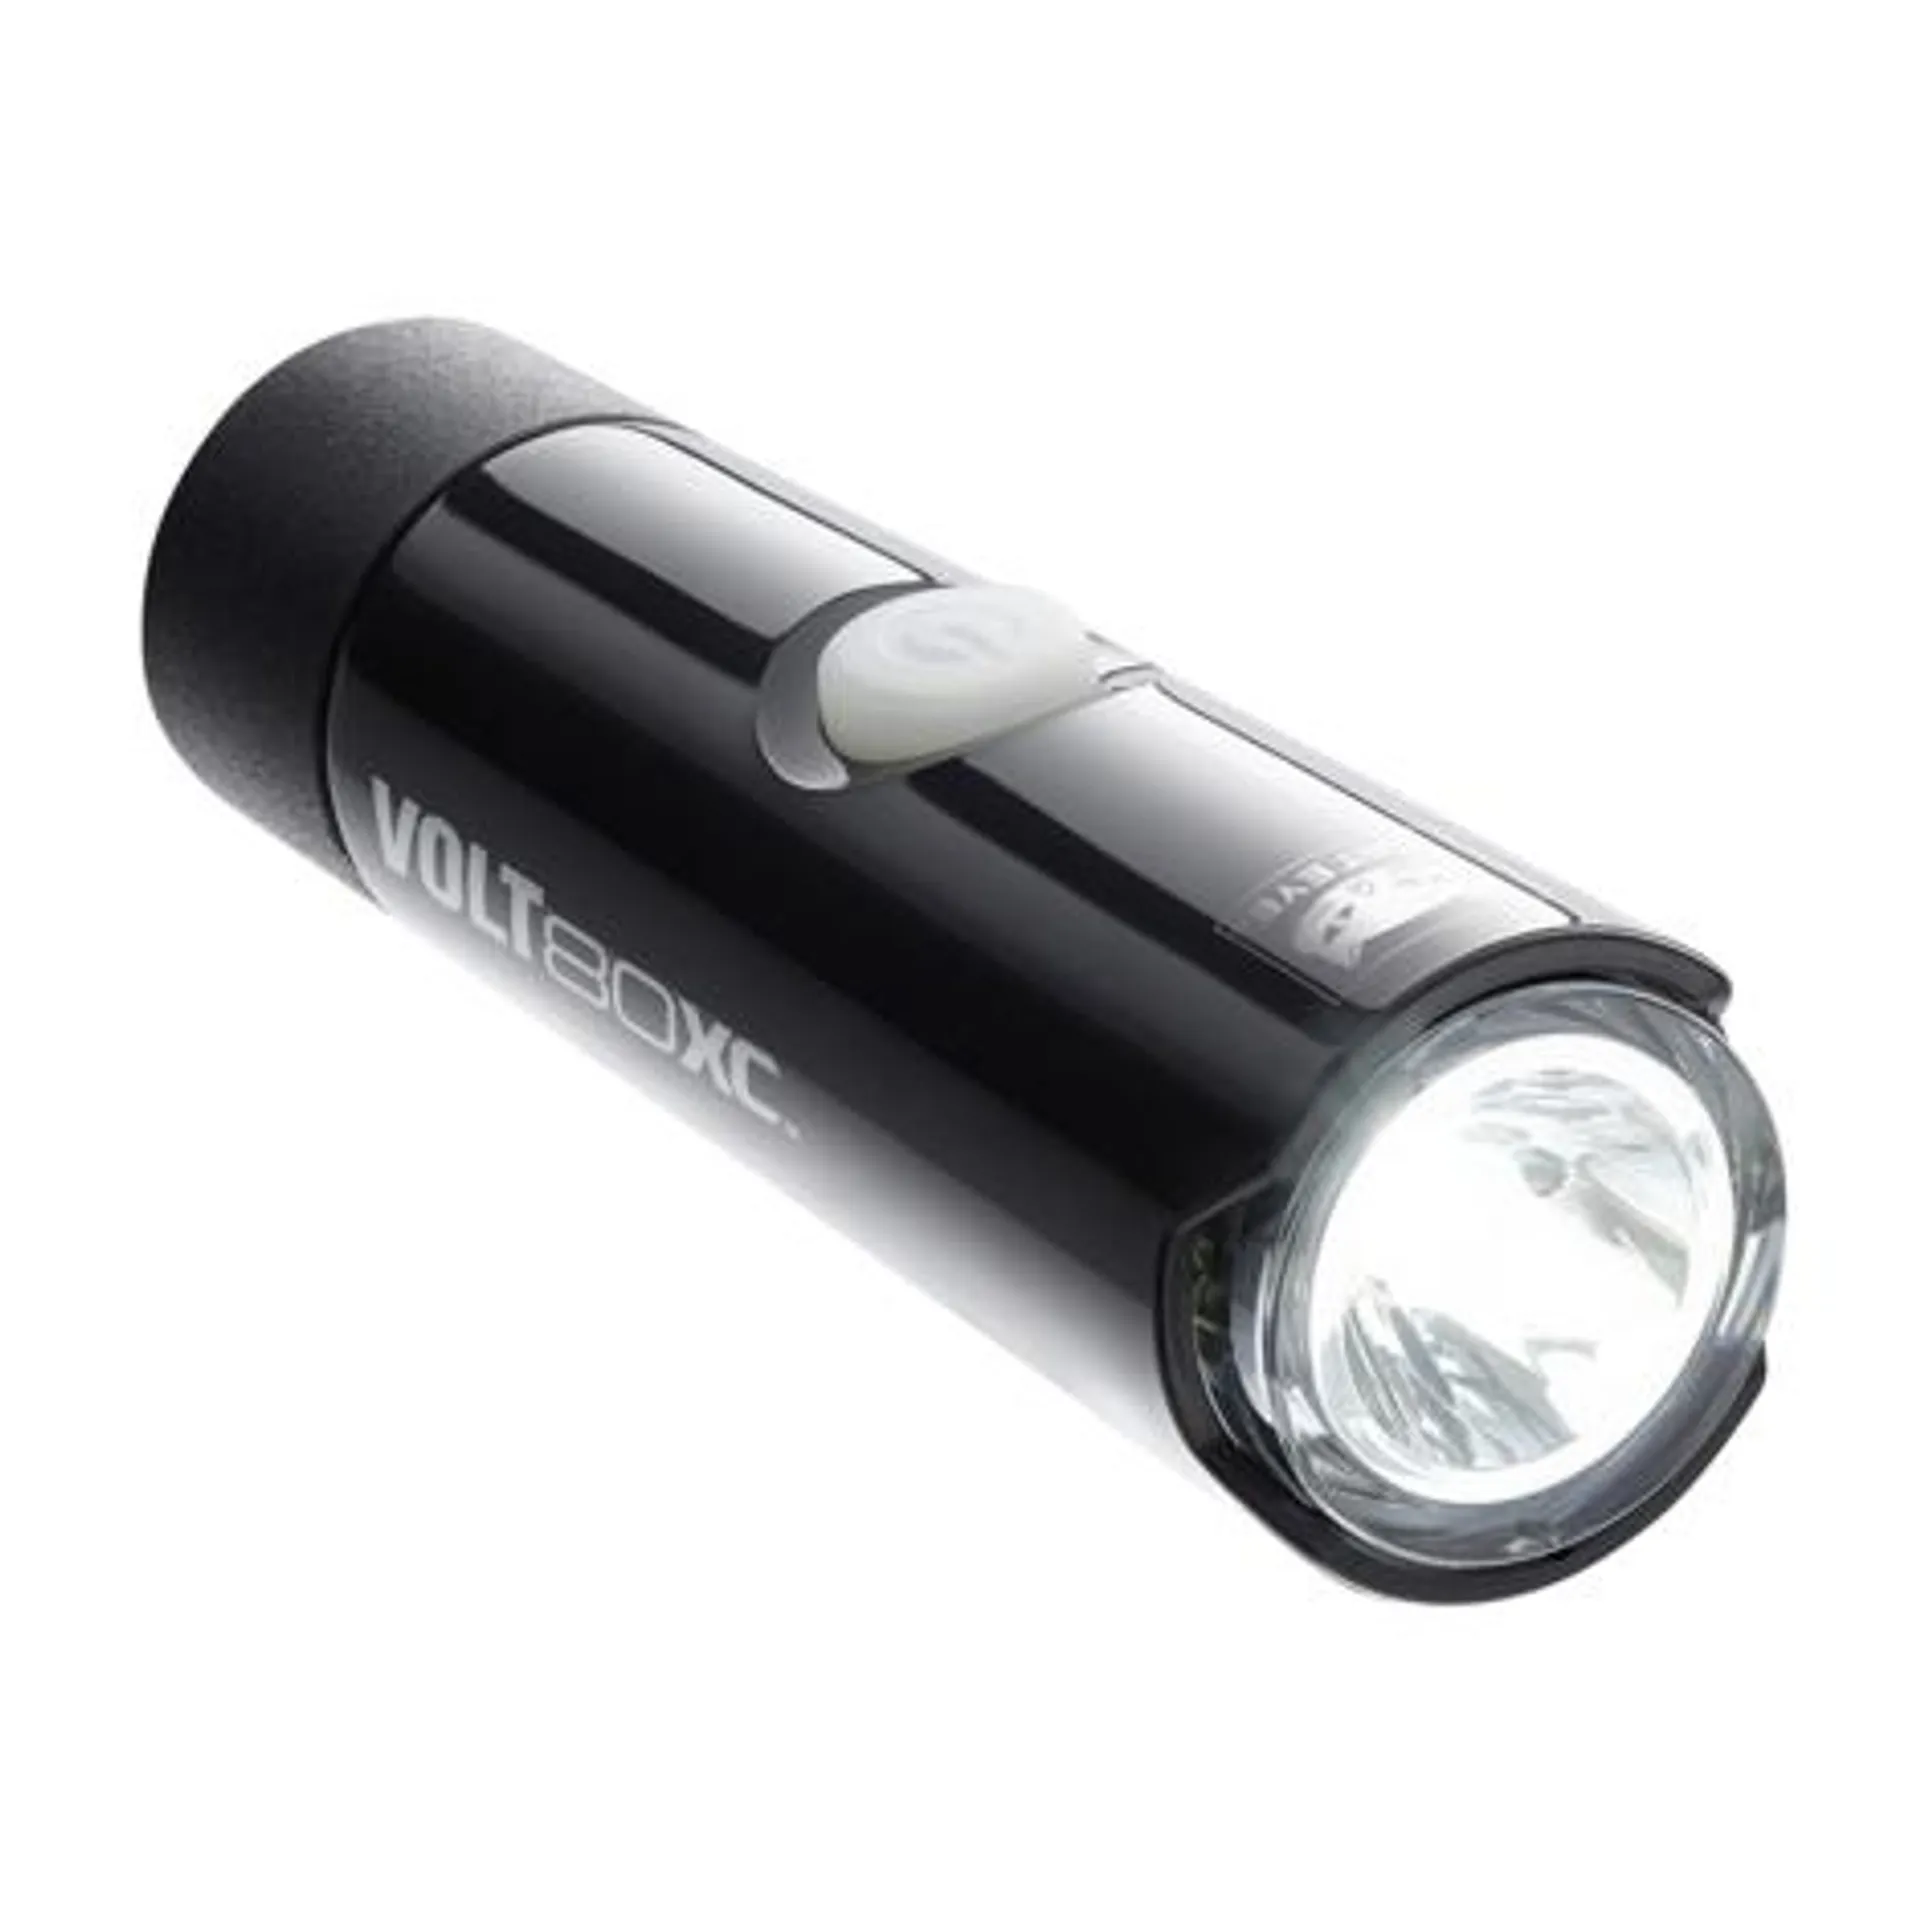 Cateye Volt 80 XC Rechargeable Front Light